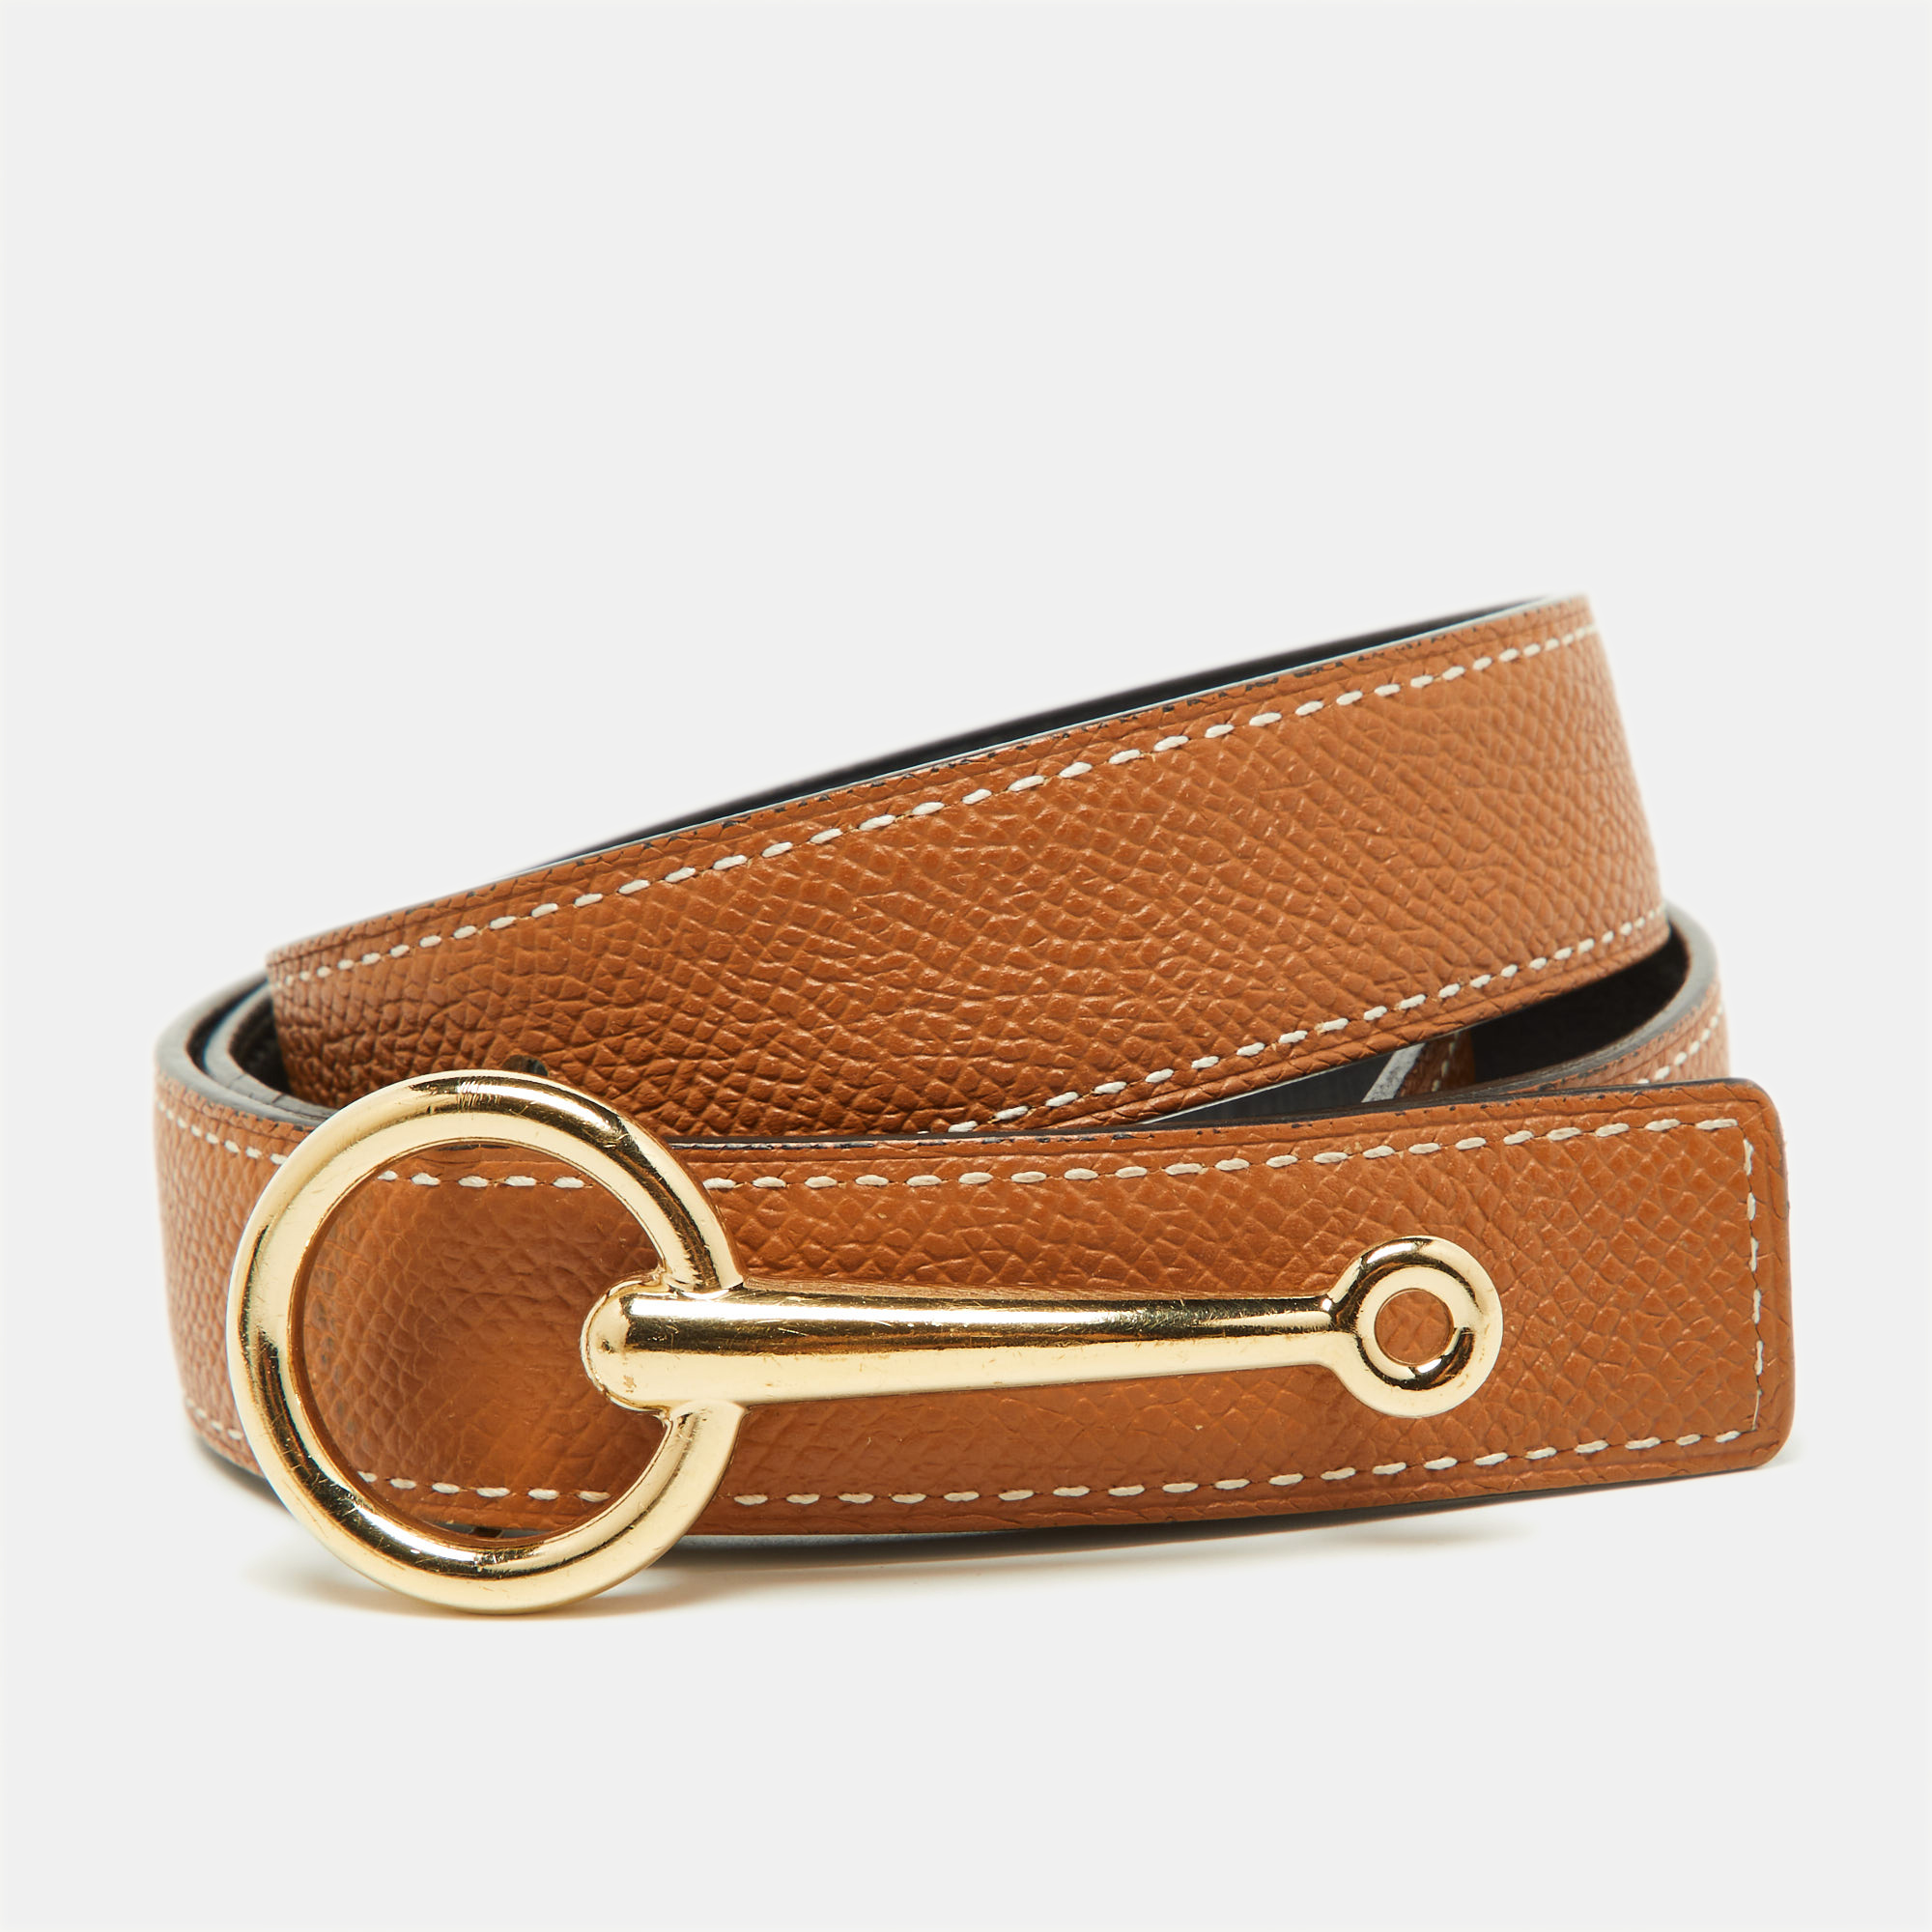 The Hermes Mors buckle belt is a luxurious accessory crafted from premium materials. It features a distinctive buckle symbolizing Hermes elegance and sophistication. This timeless belt effortlessly enhances any outfit making it a coveted choice for fashion enthusiasts seeking both style and refinement.